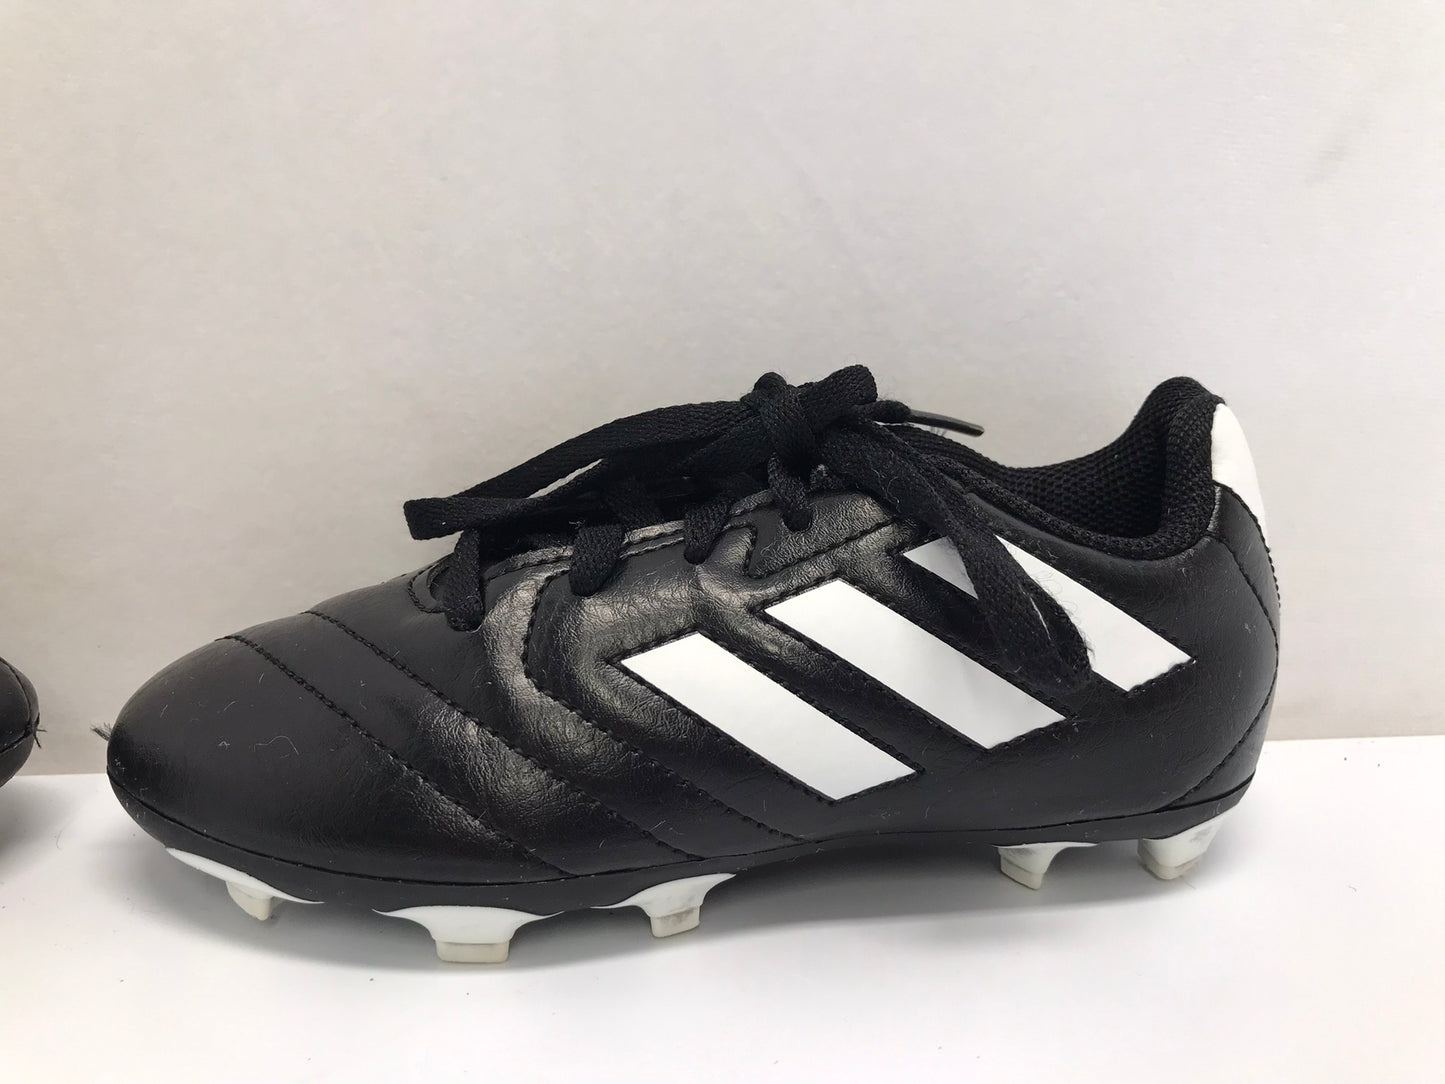 Soccer Shoes Cleats Child Size 12 Adidas Black White Excellent